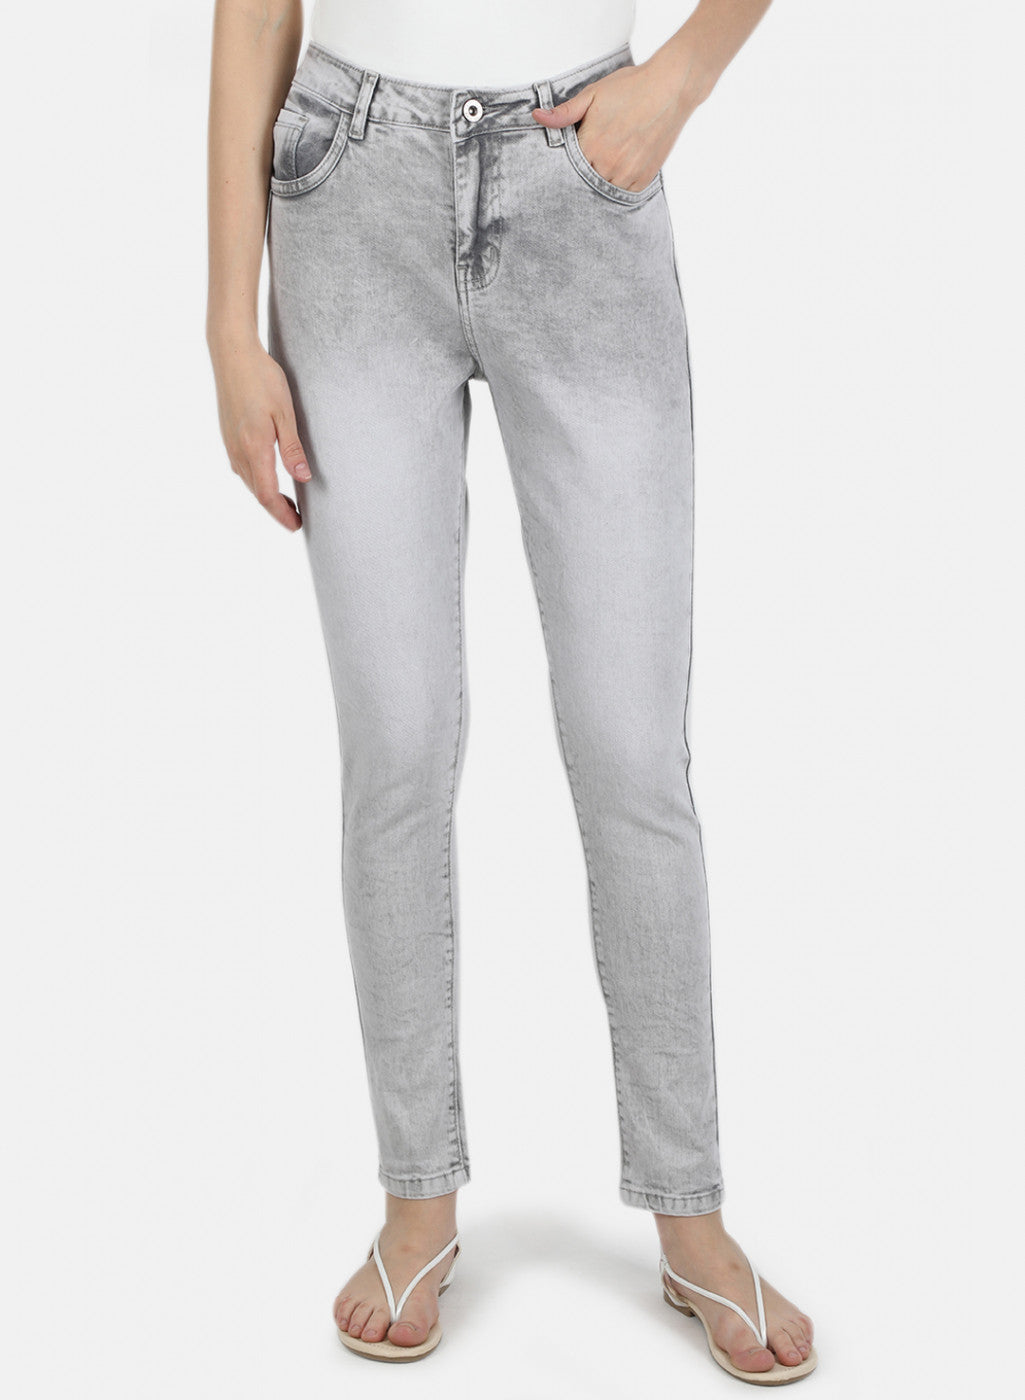 Grey Jeans For Women - Buy Grey Jeans For Women online in India